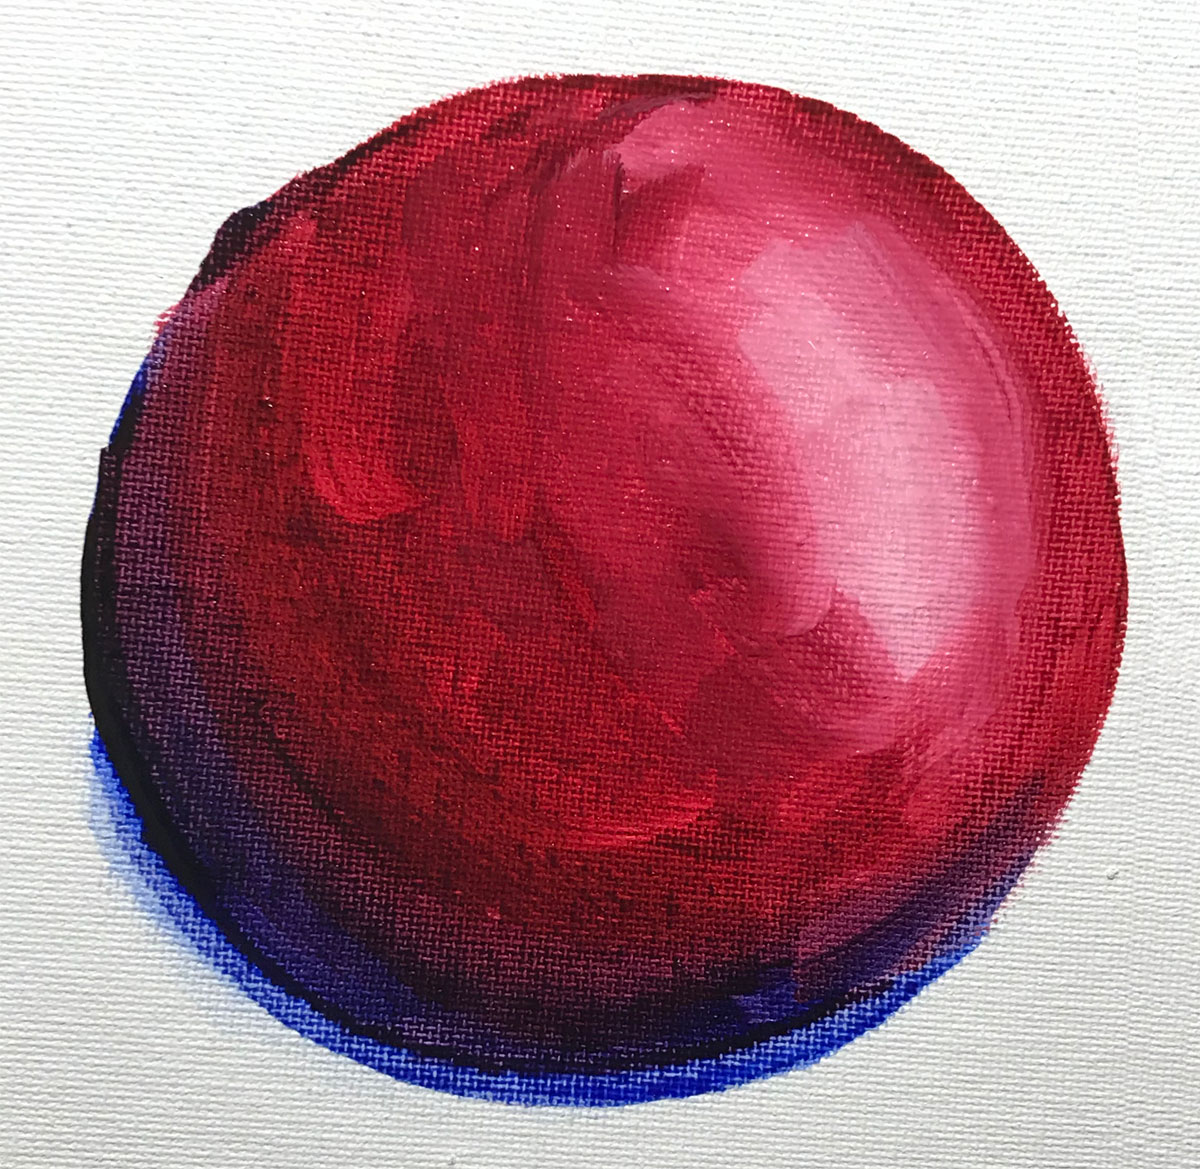 Painted with medium.